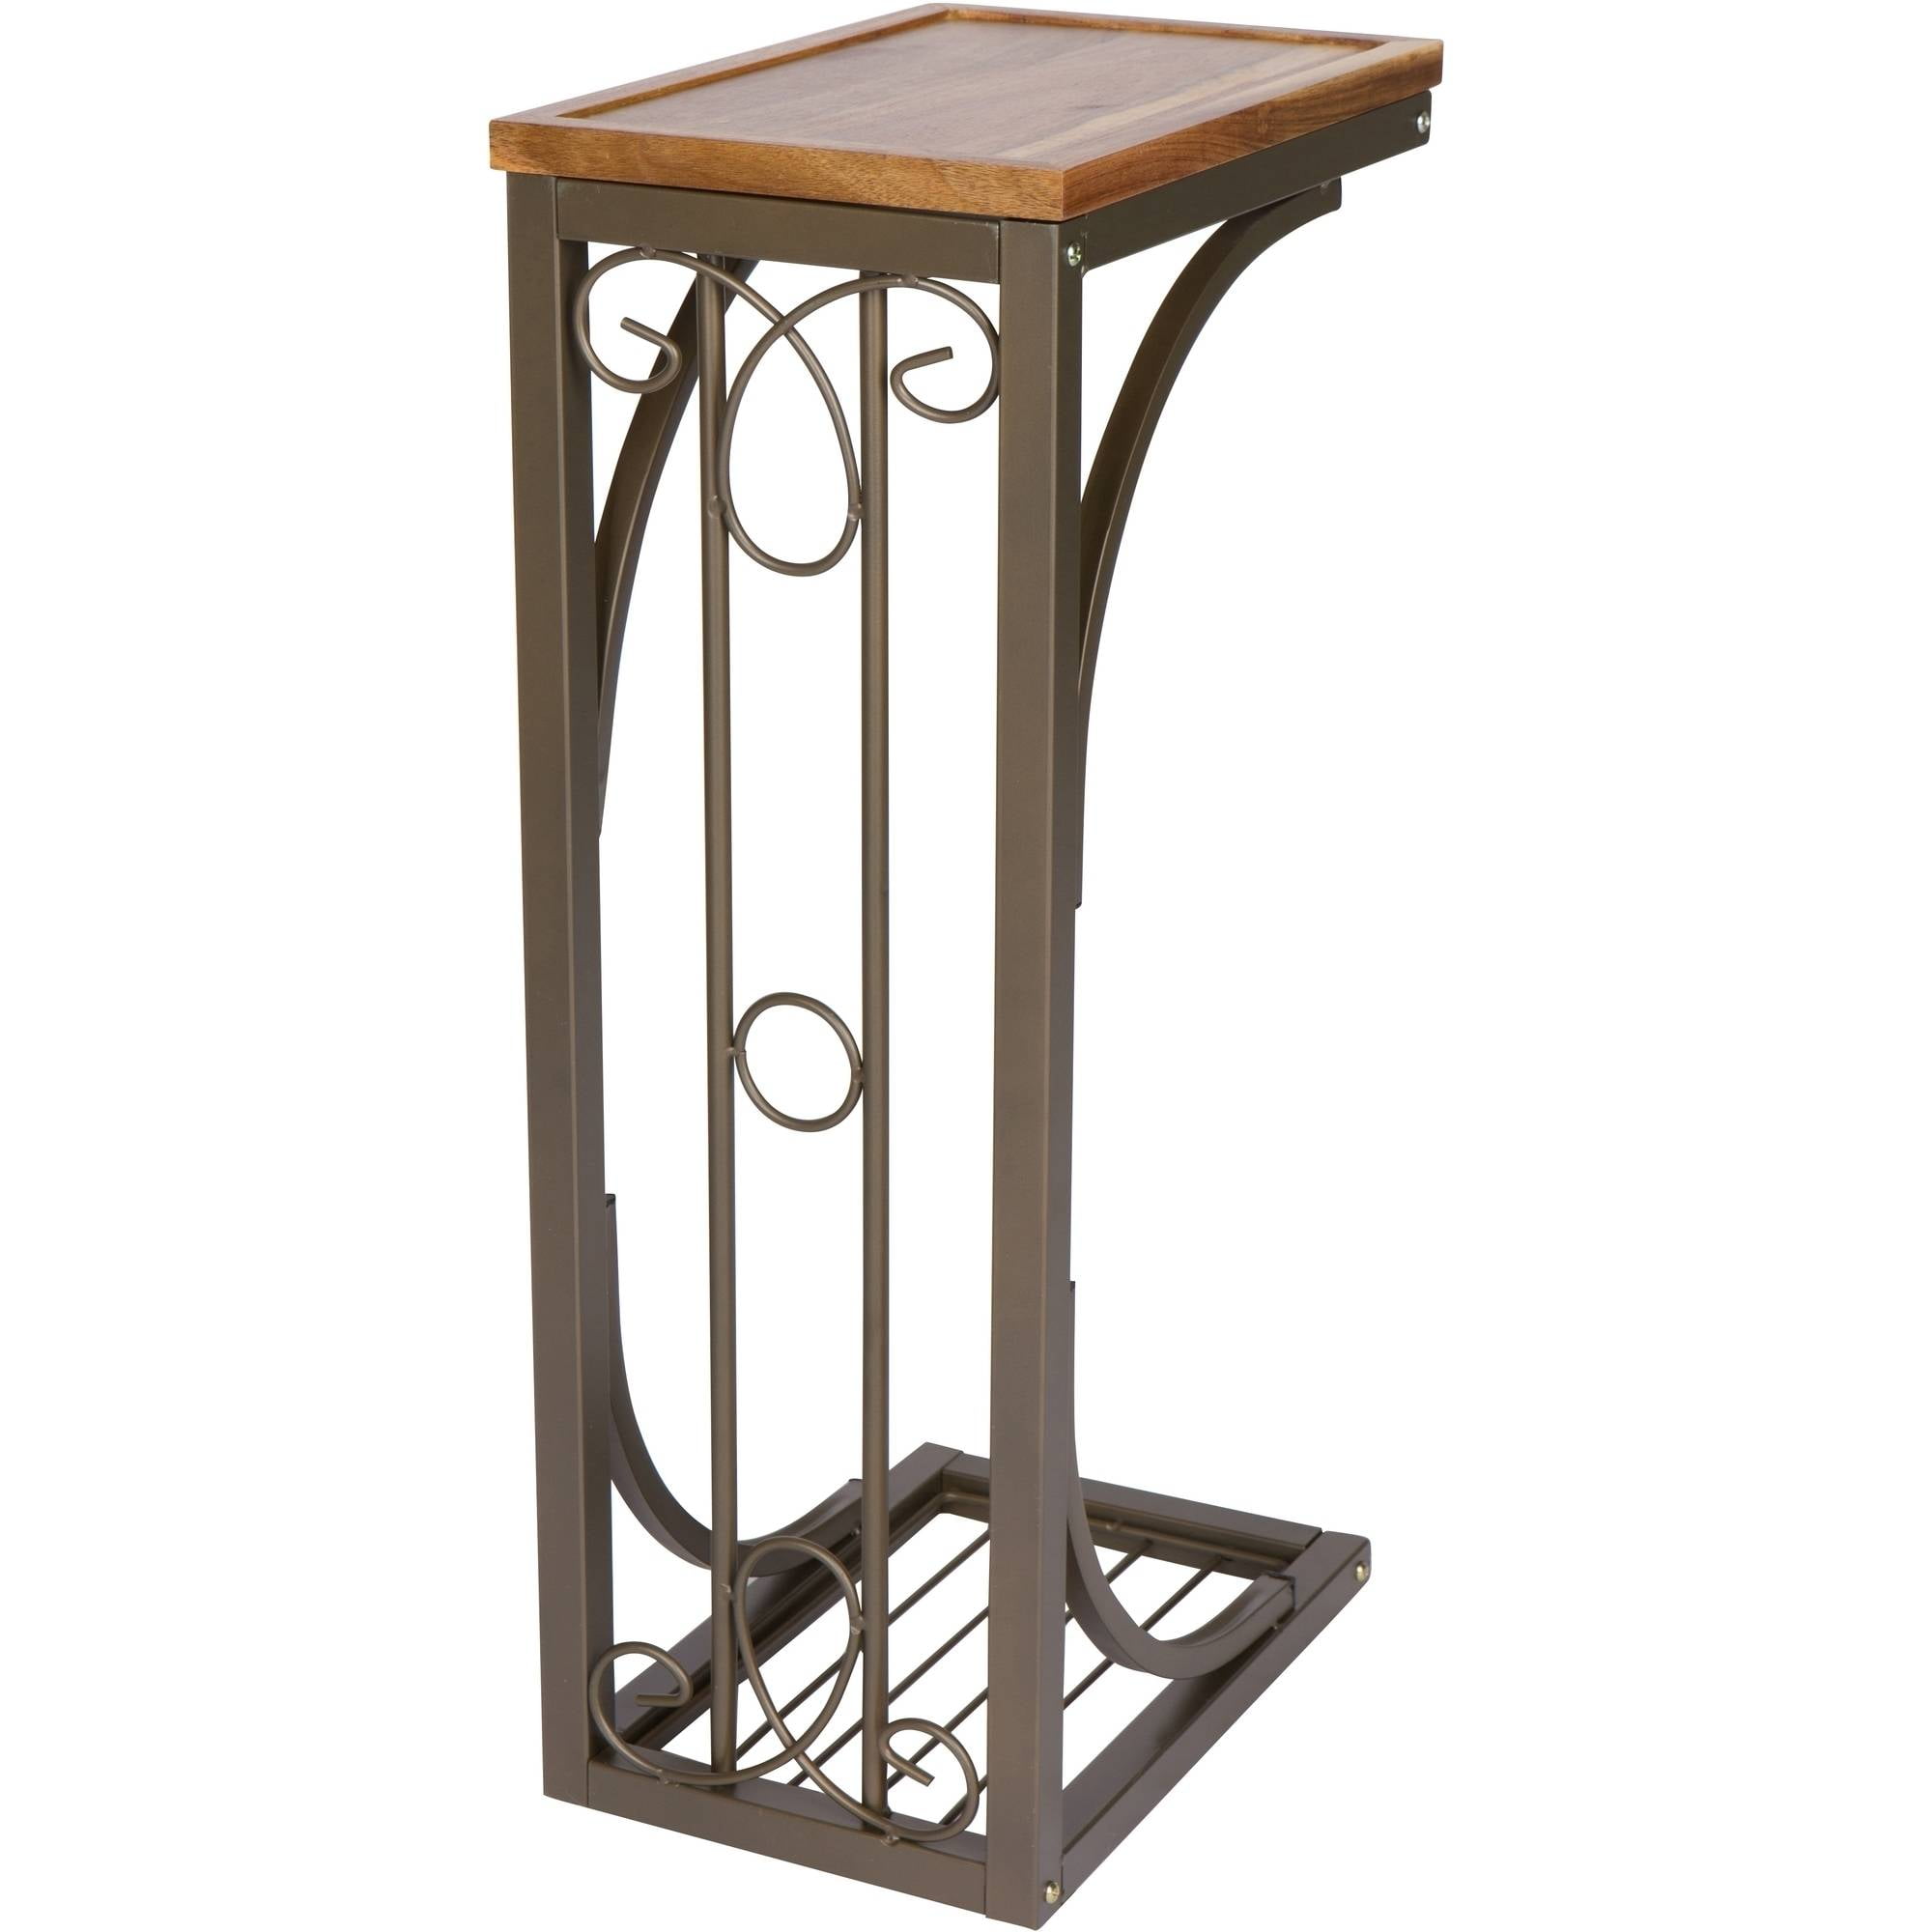 Black Metal Tempered Glass Top Accent Table Magazine Rack End Bed Side Scroll 